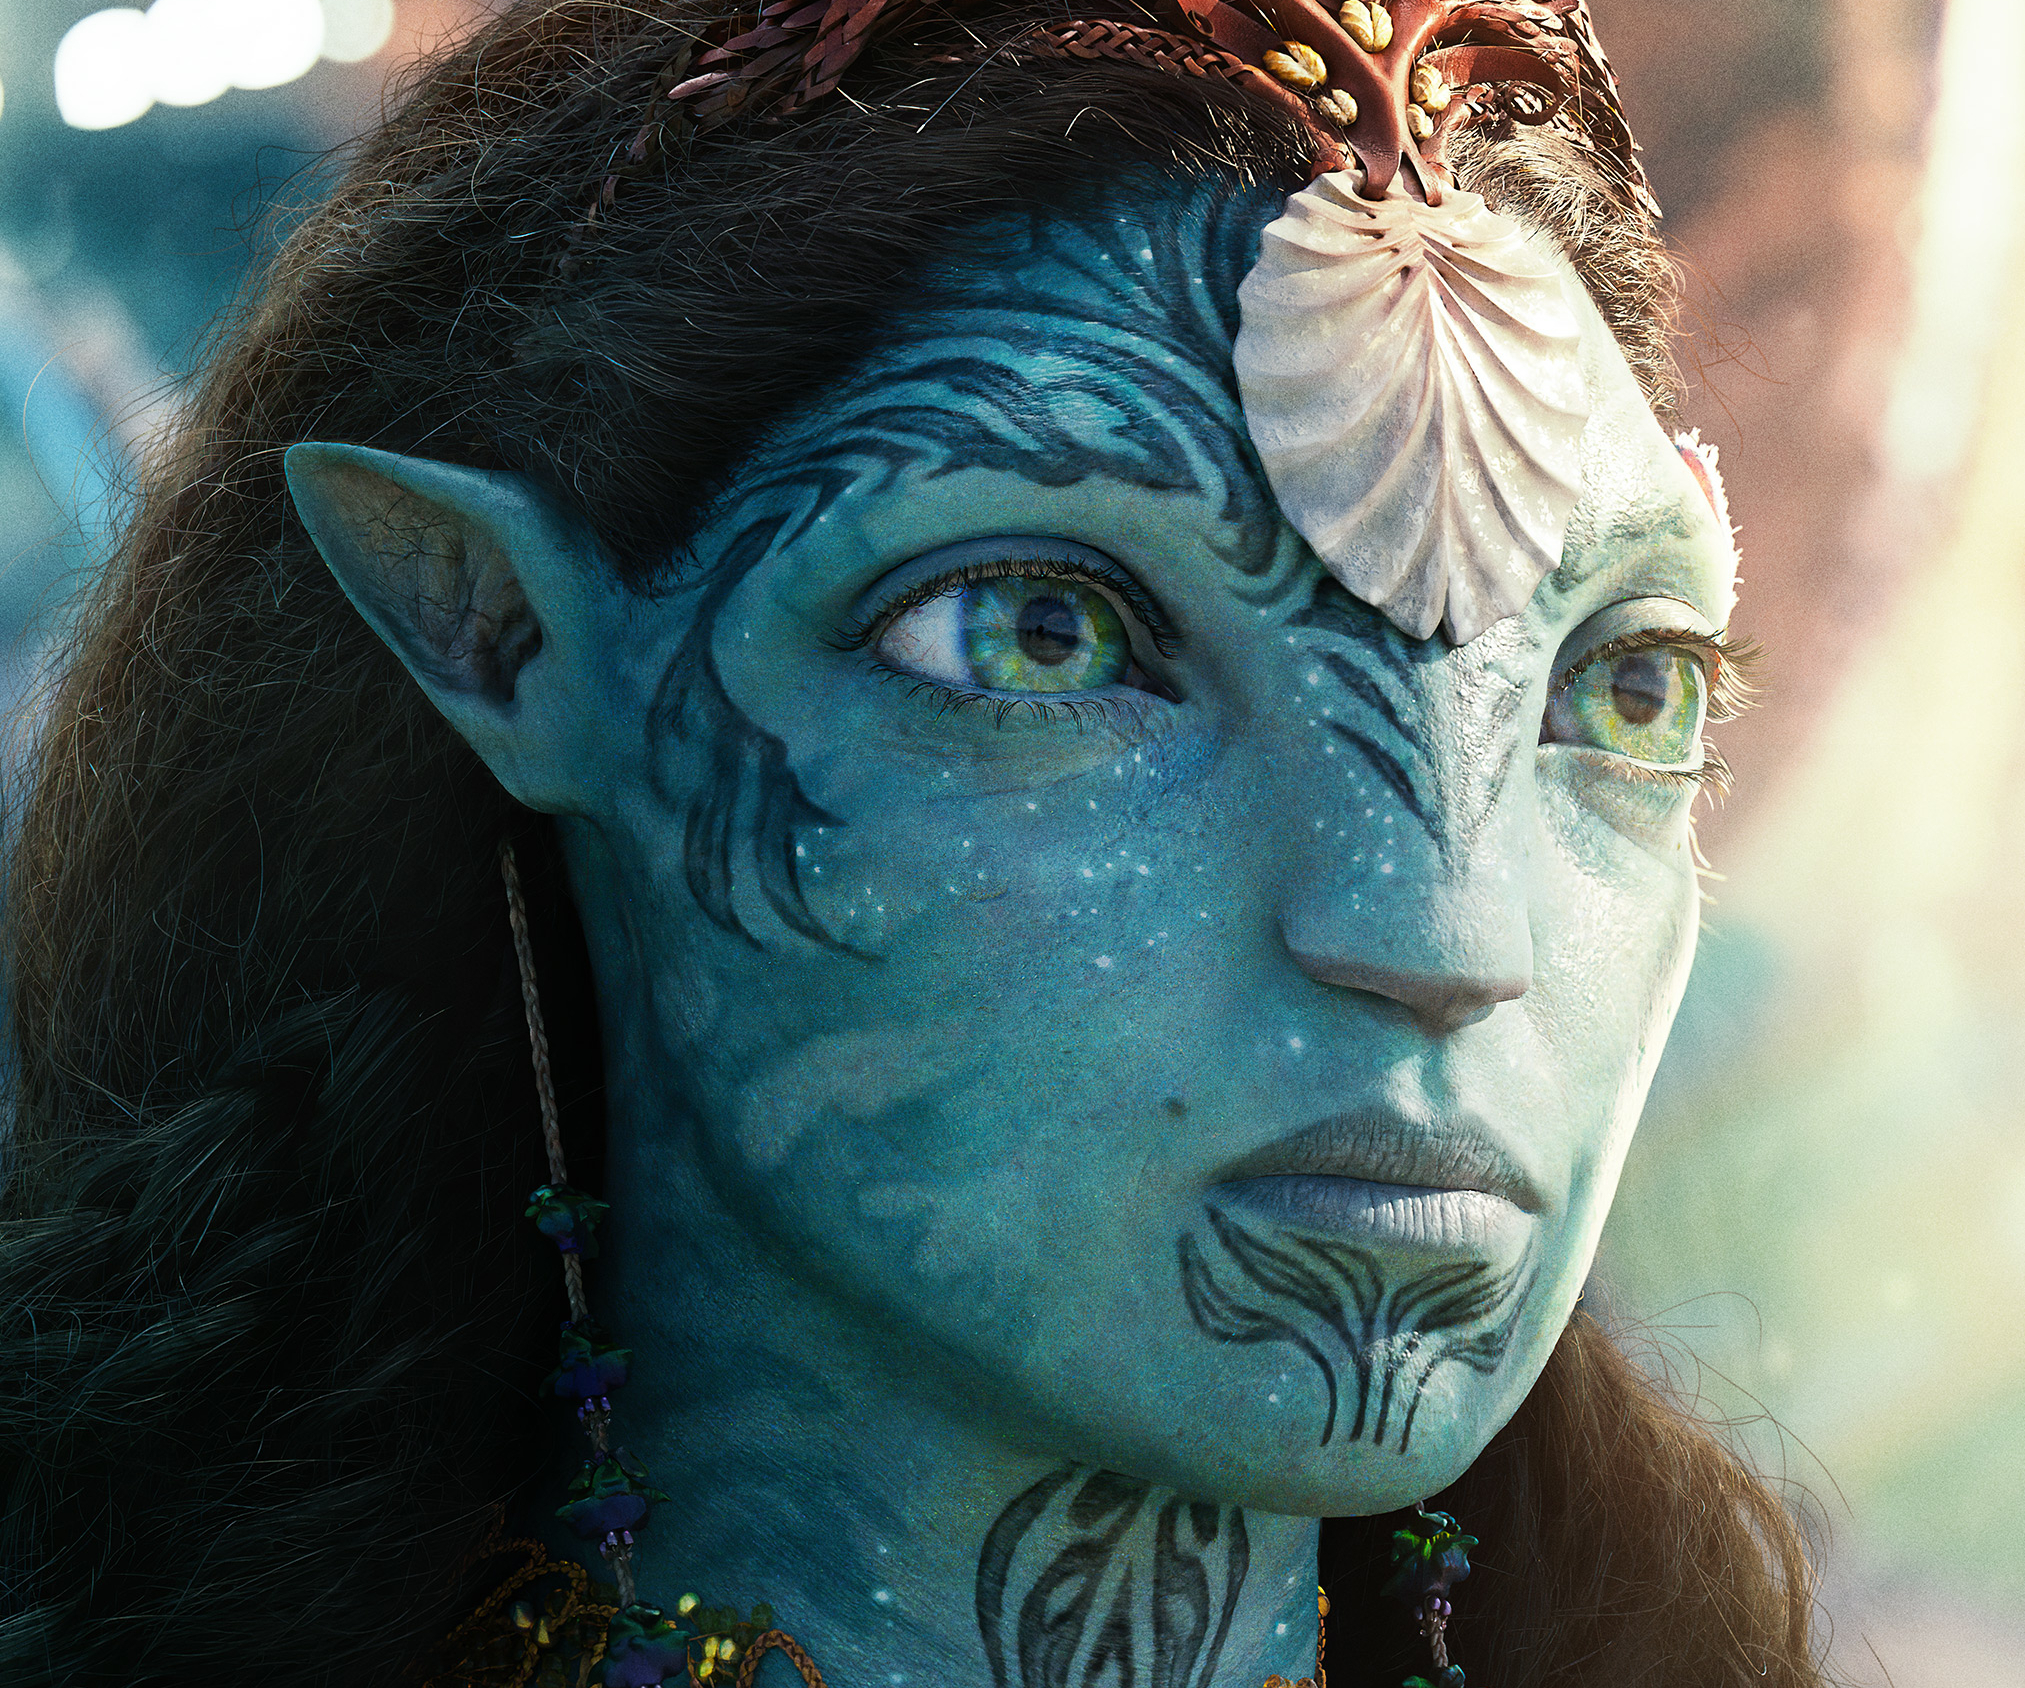 Ronal Avatar 2 The Way of Water Wallpaper, HD Movies 4K Wallpapers, Images,  Photos and Background - Wallpapers Den